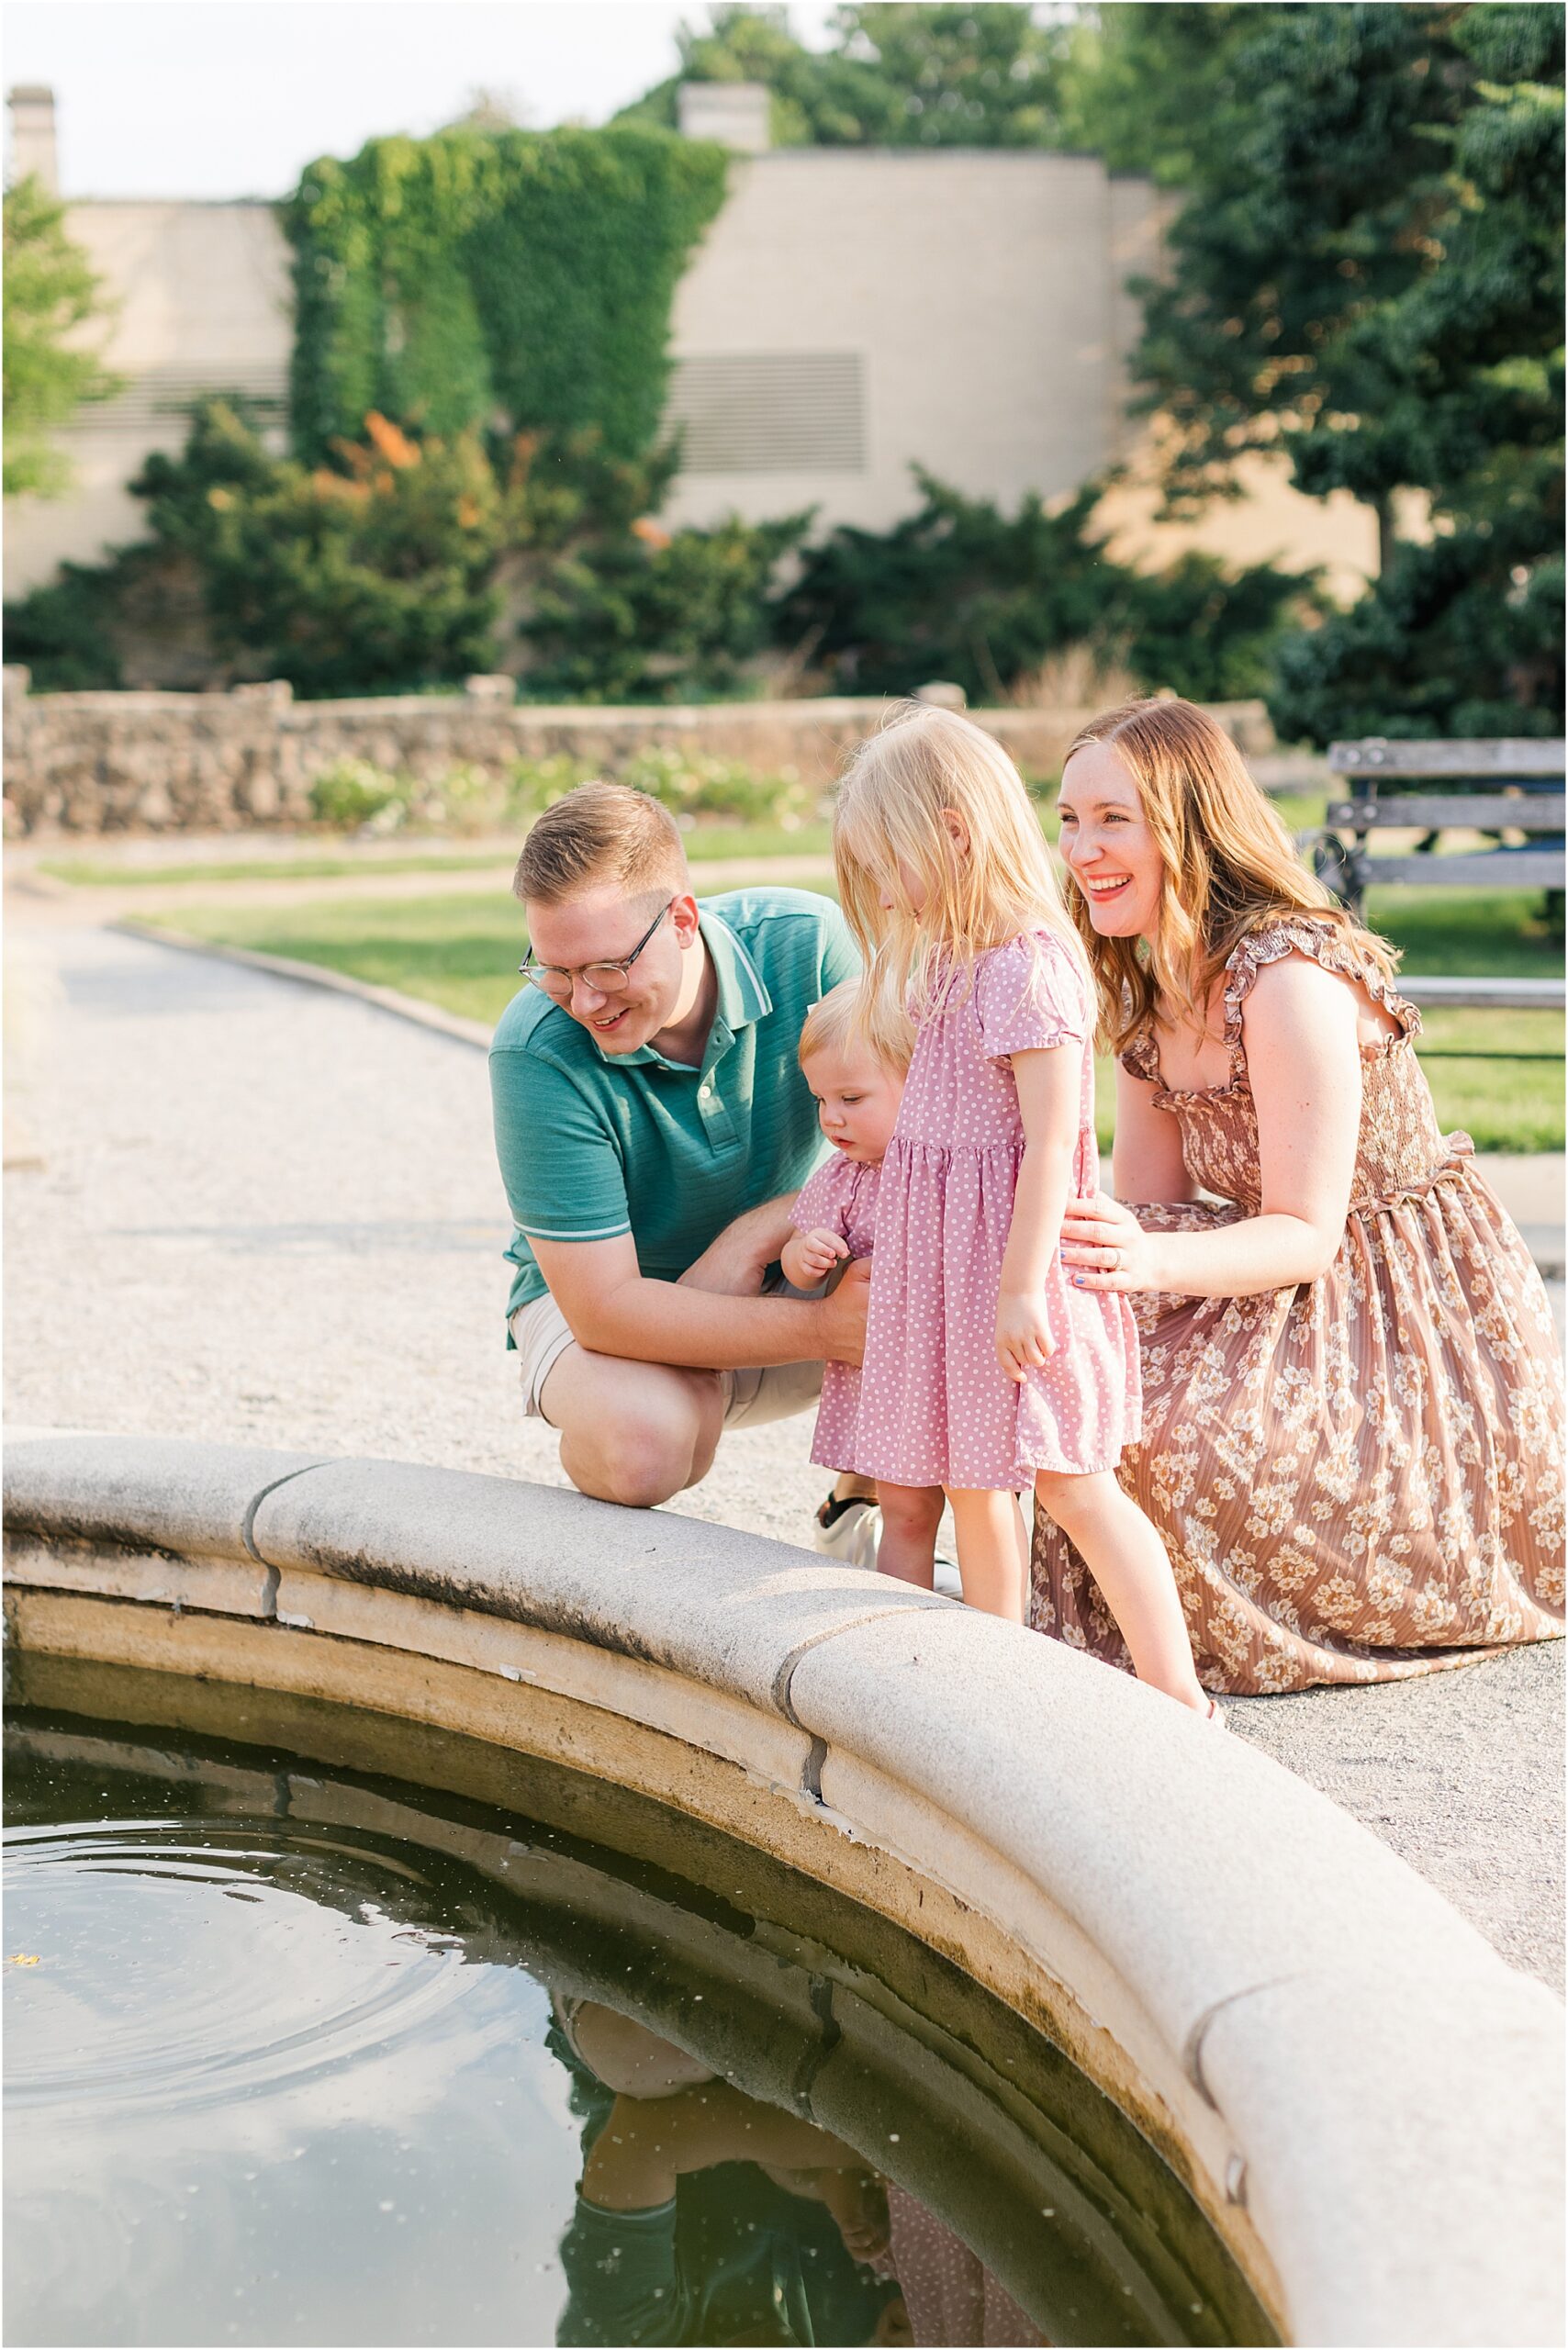 A family throwing flower petals in the coy pond at their summer family photo session.